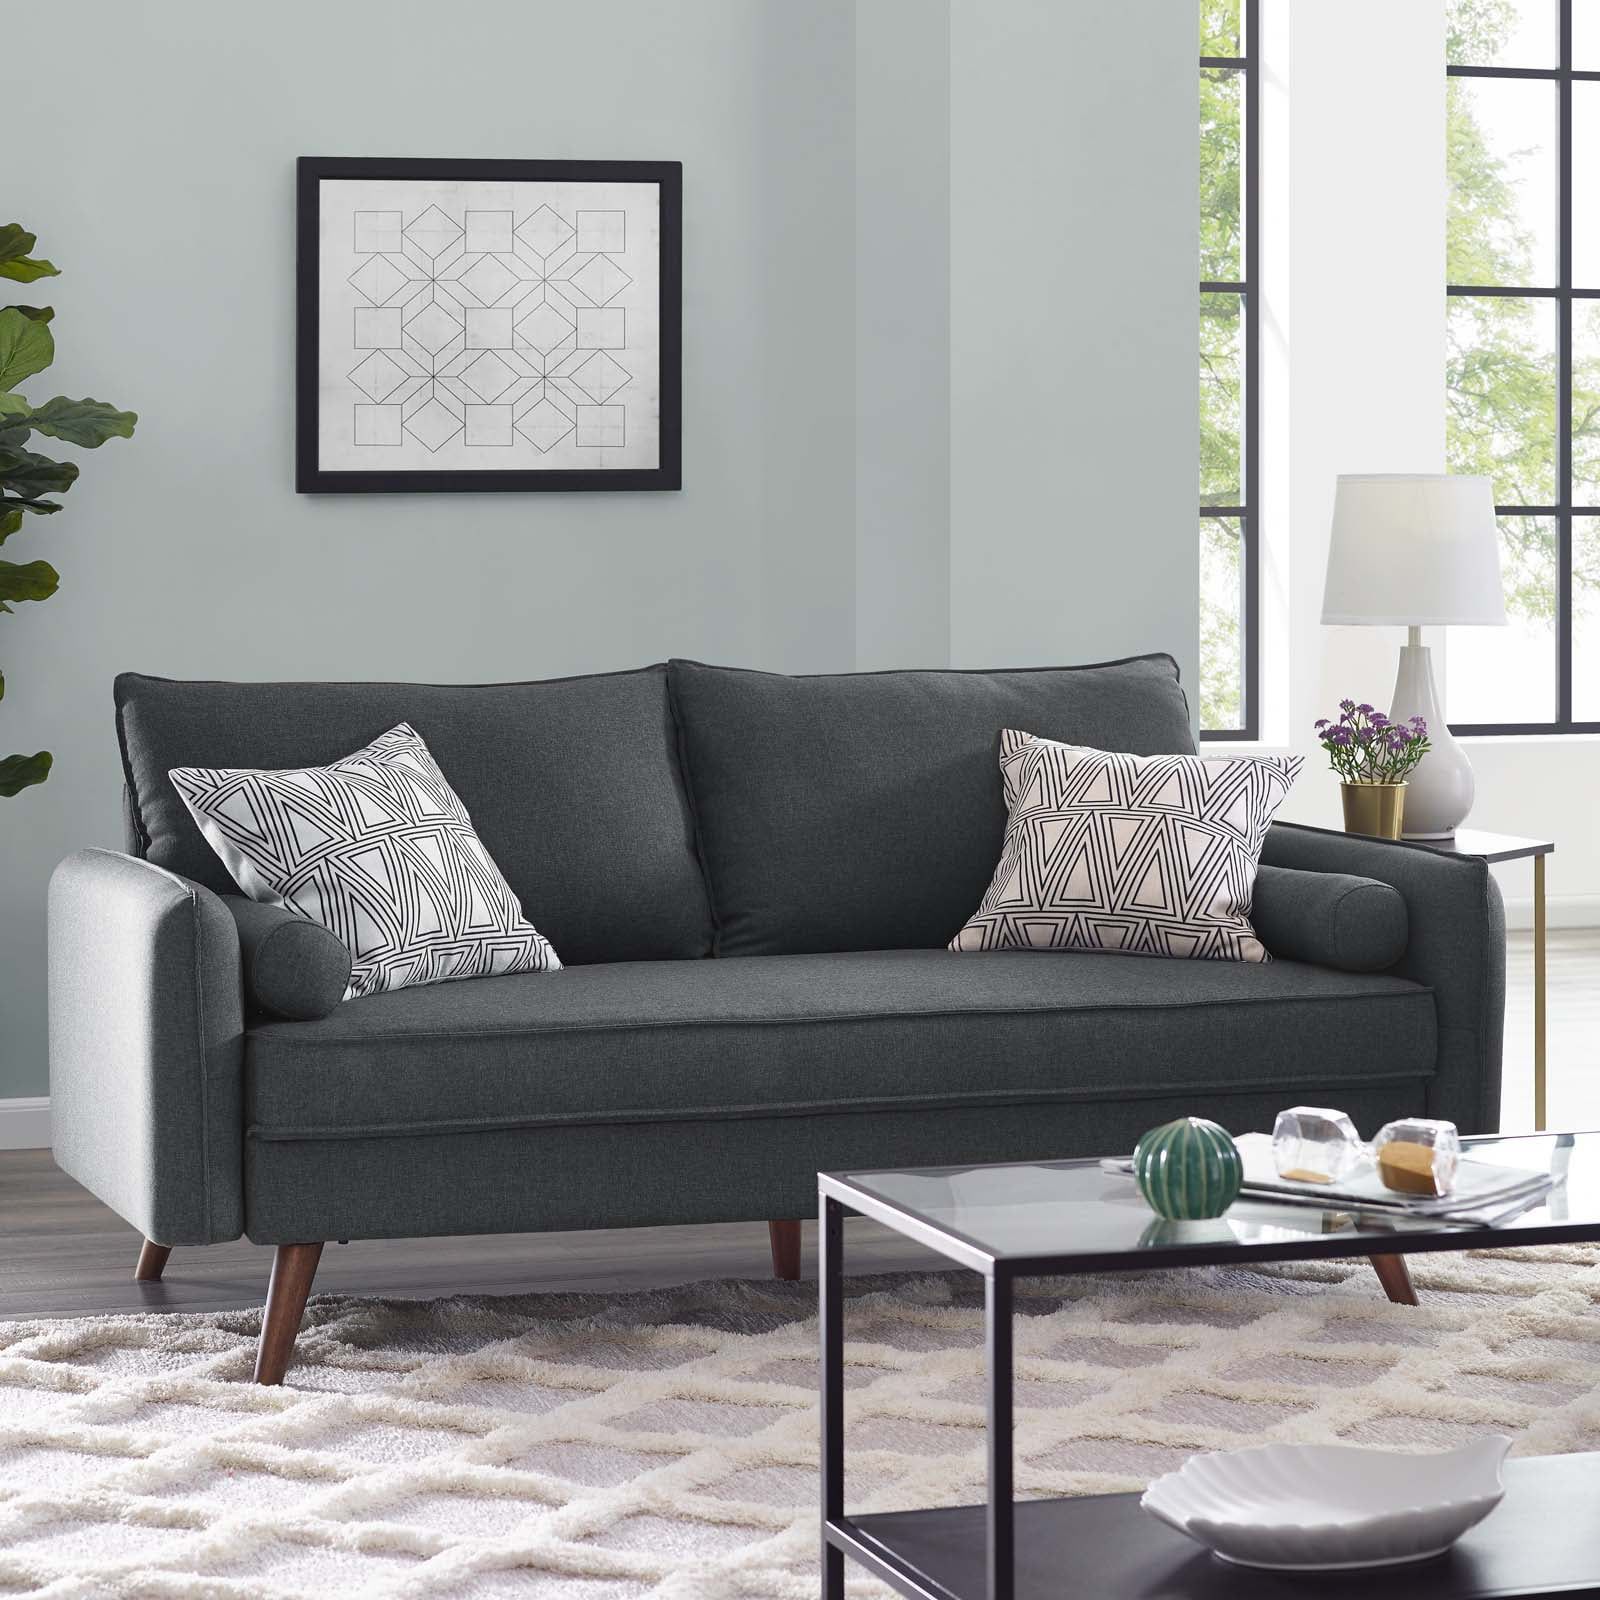 Modway Revive Fabric Upholstered Sofa, Multiple Colors – Walmart With Regard To Sofas In Multiple Colors (Gallery 9 of 20)